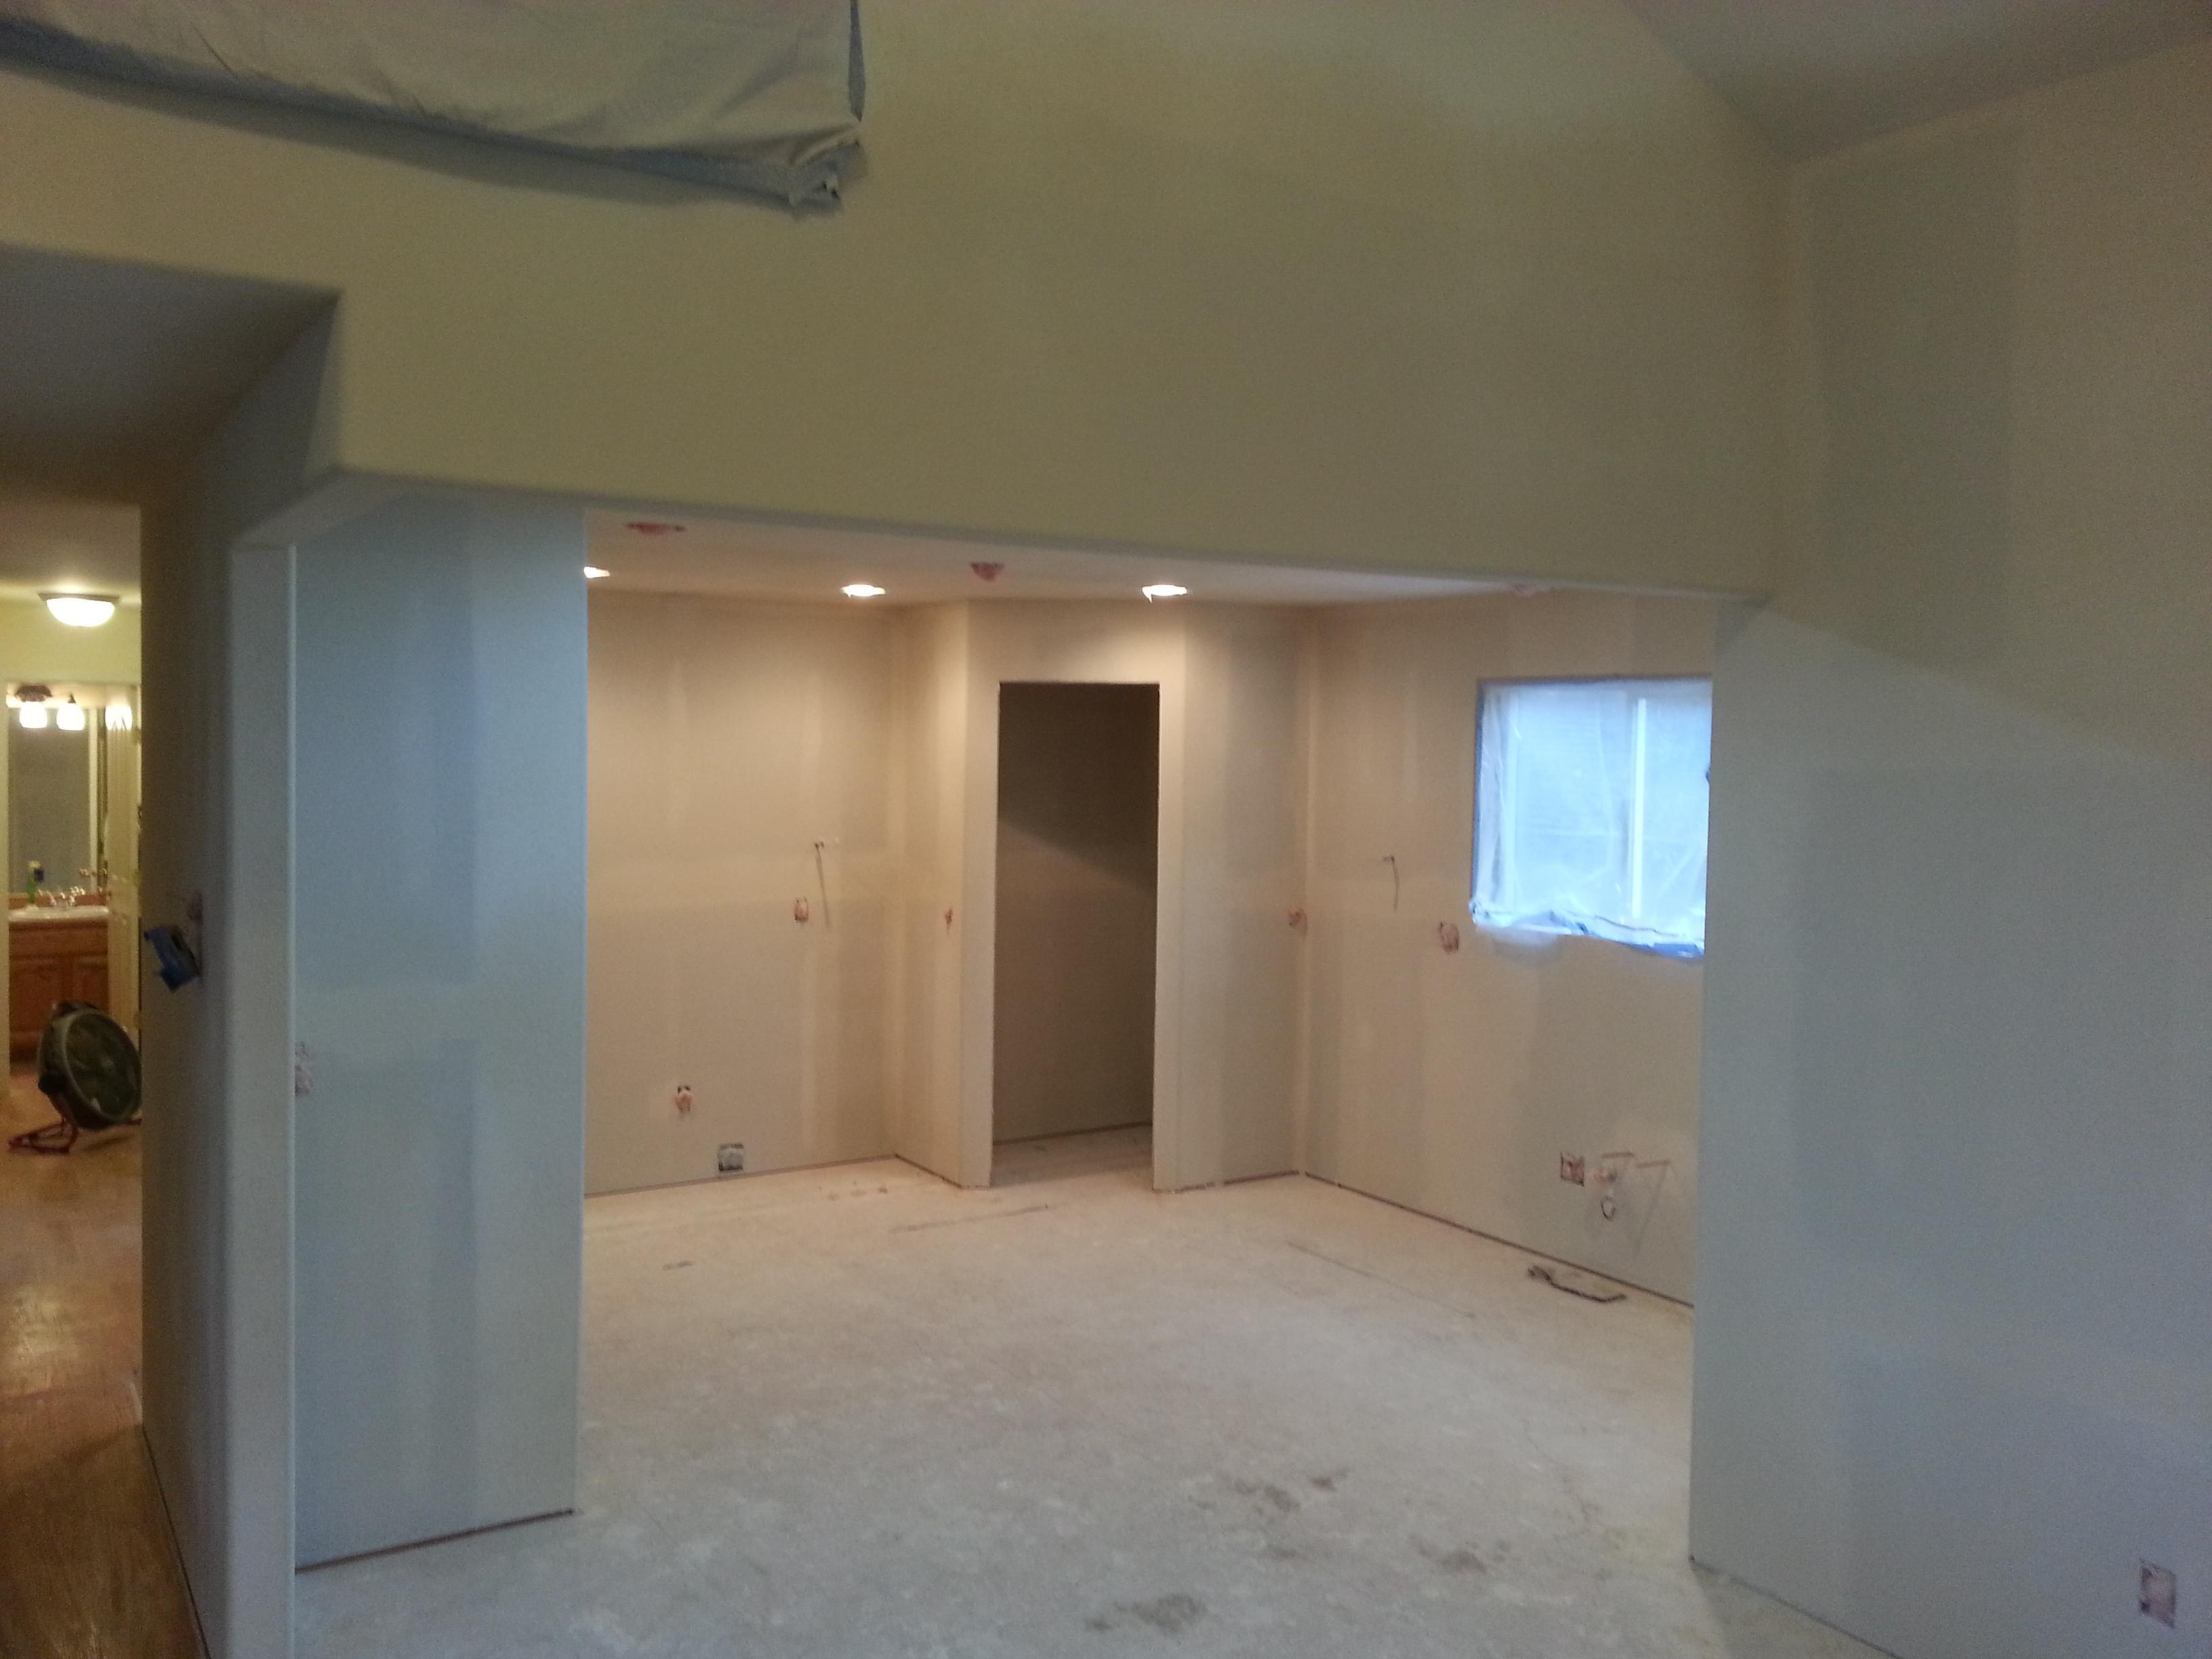 Opening a small closed kitchen into a more open plan with a pantry and an island. We took the project to drywall texture, home owner will be painting.